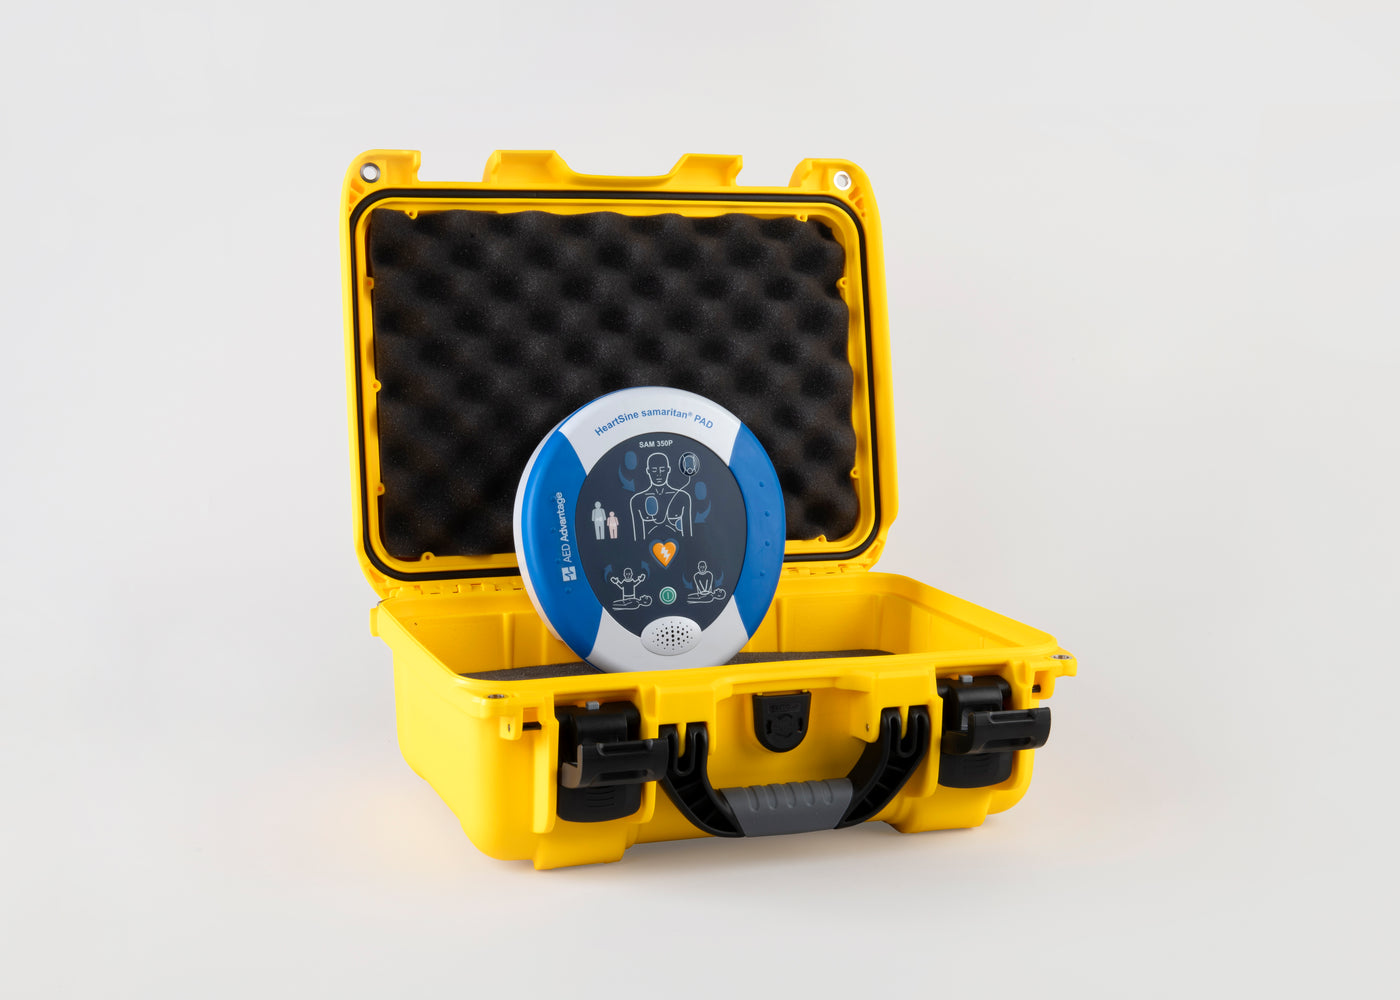 A blue and gray HeartSine 500P AED inside a bright yellow hardshell carry case